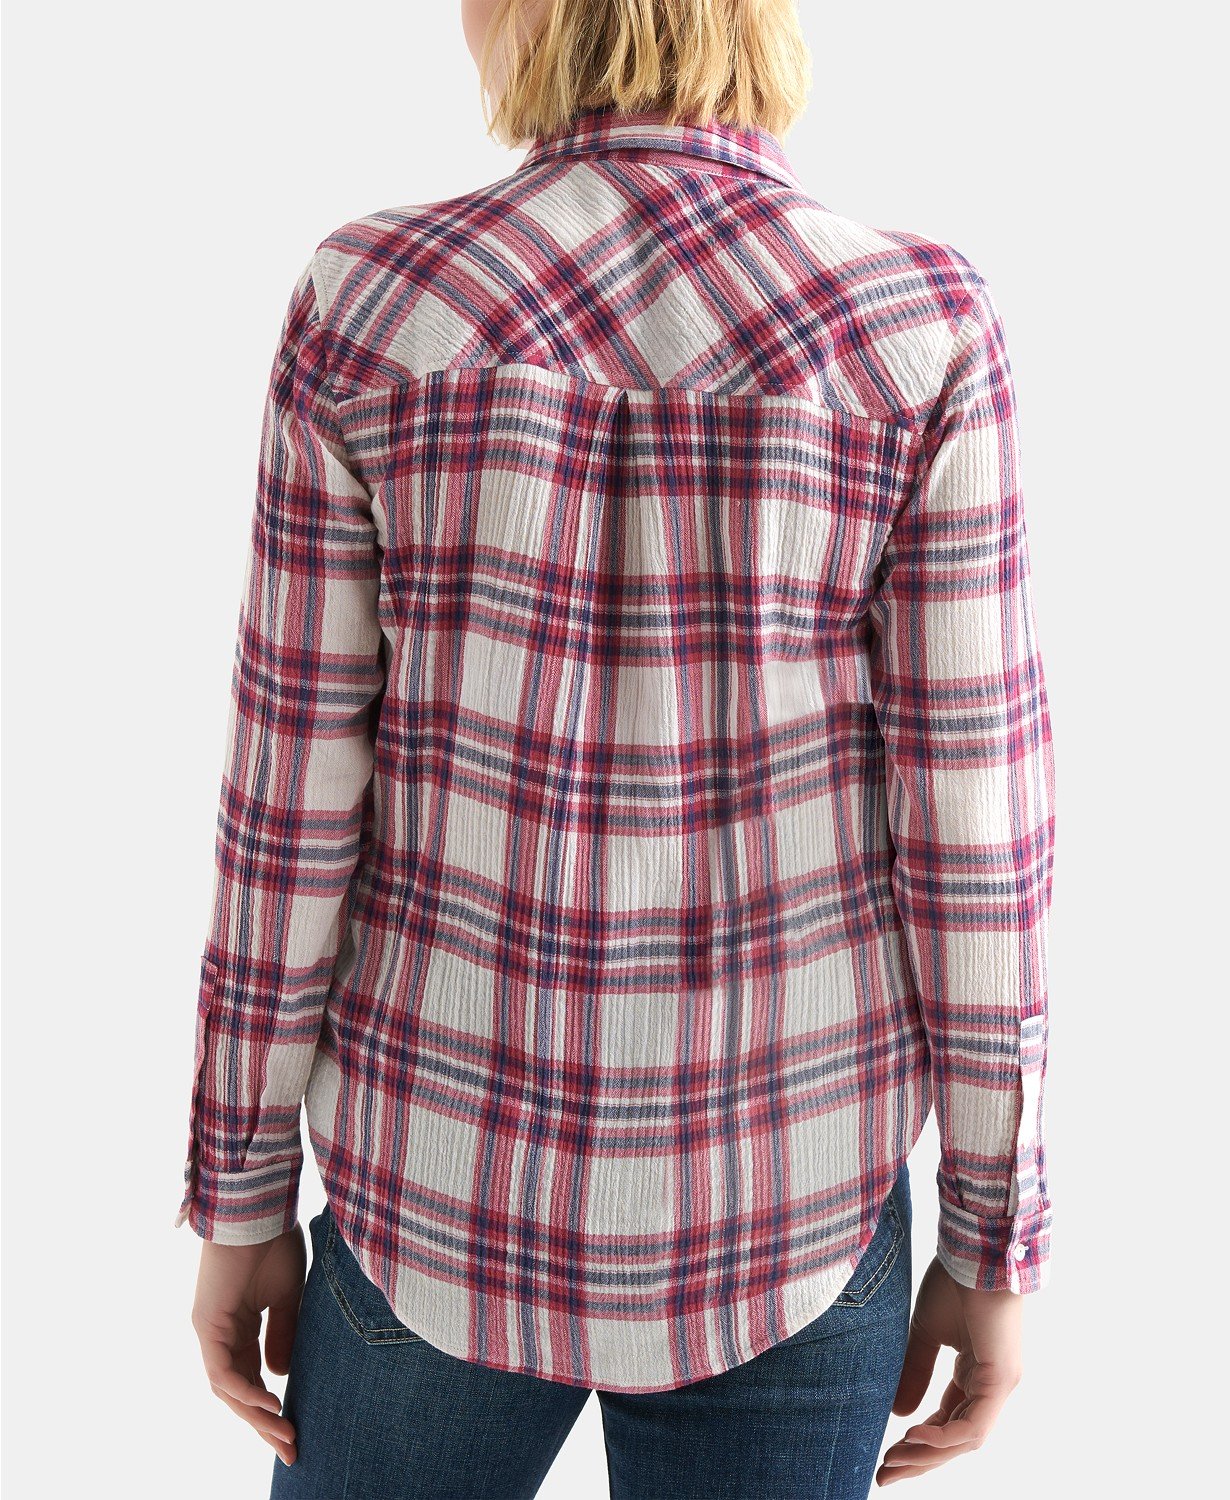 Lucky Brand Plaid Button-Down Top Red L - 